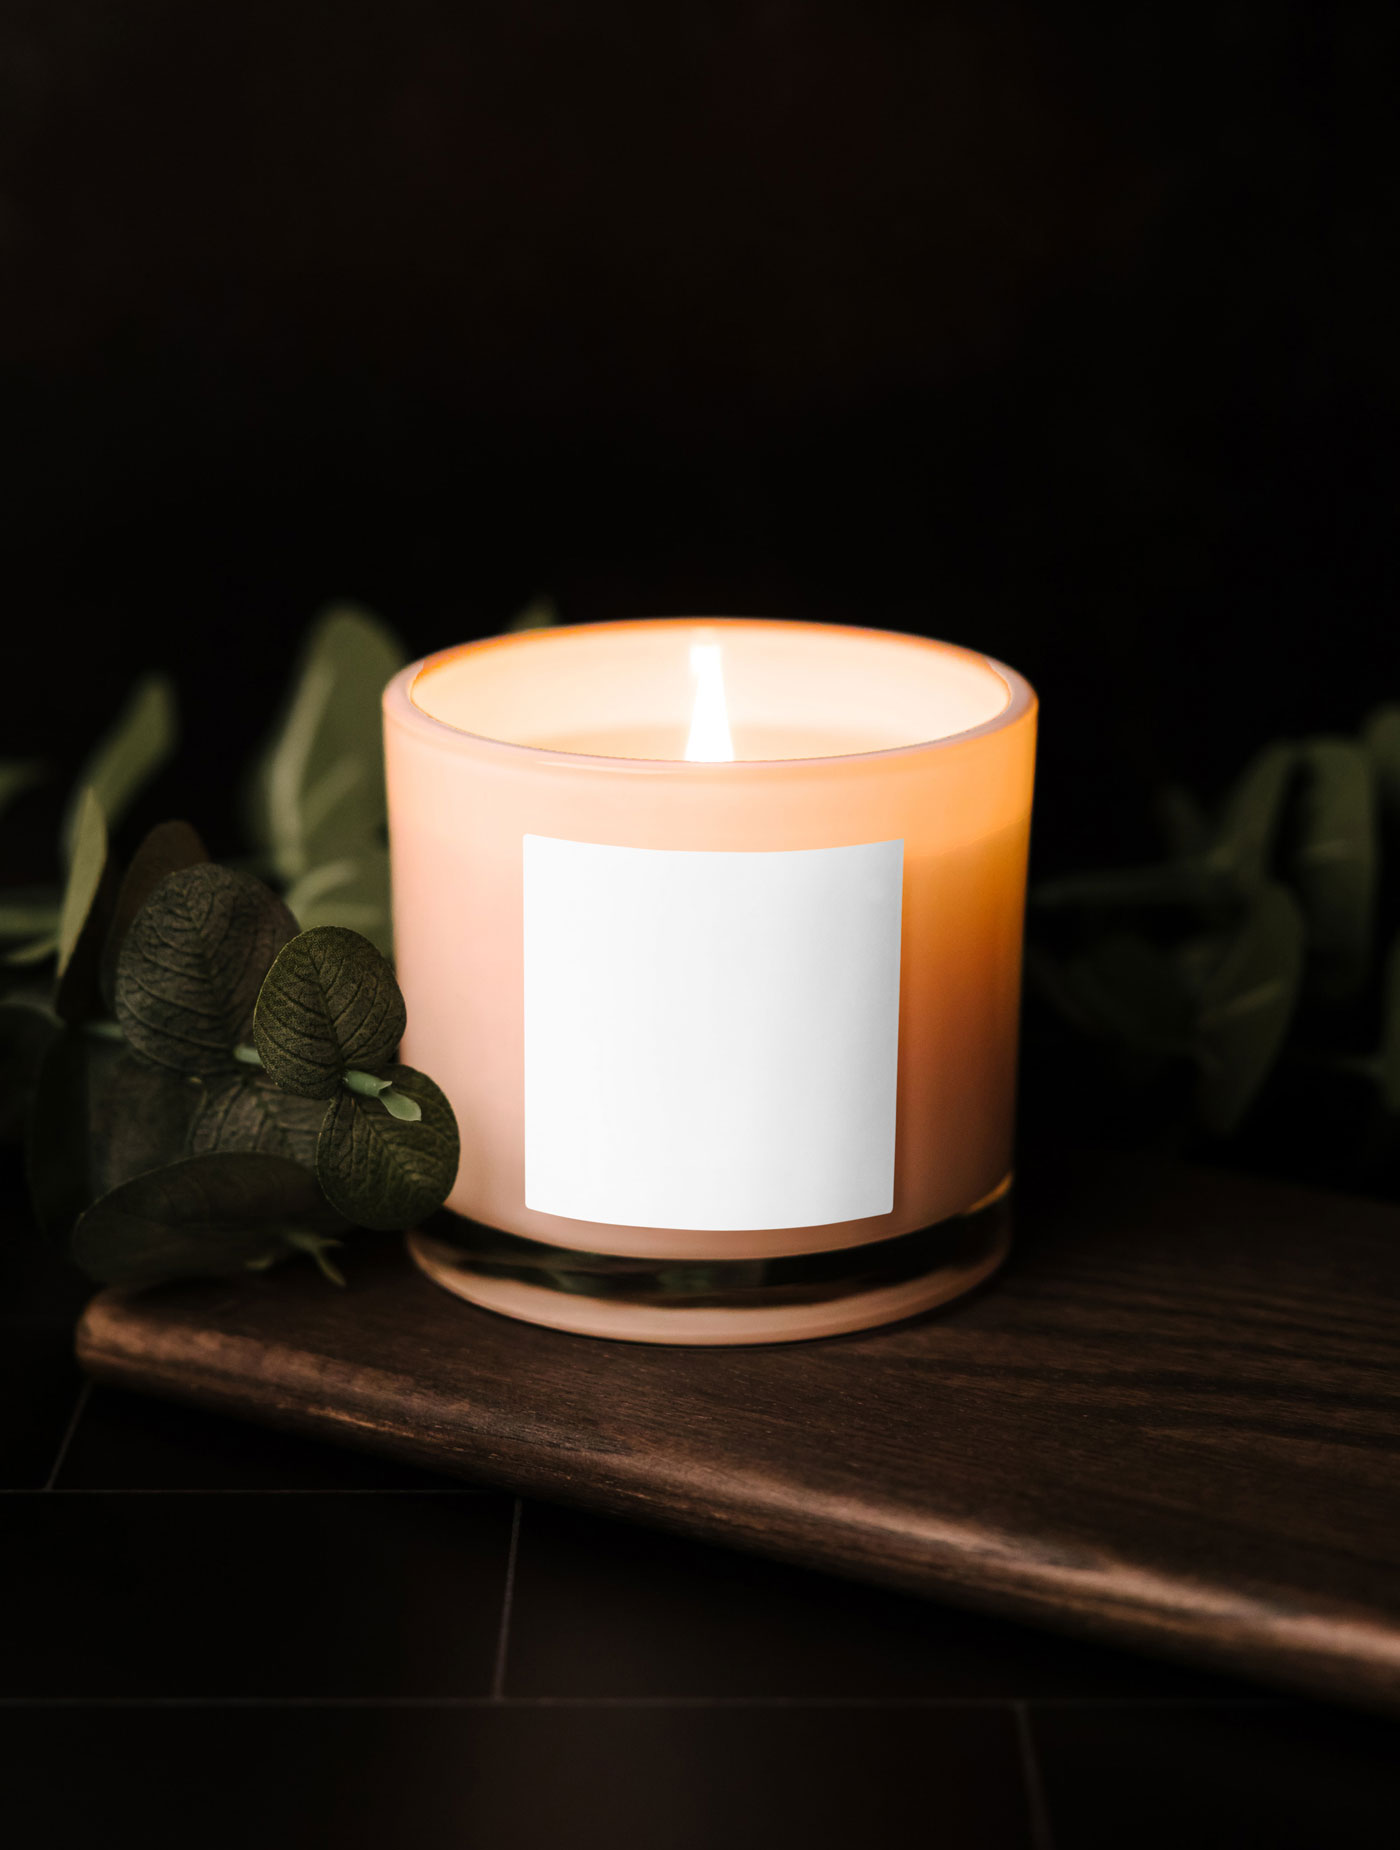 Front View of Artistic Branded Candle Mockup FREE PSD